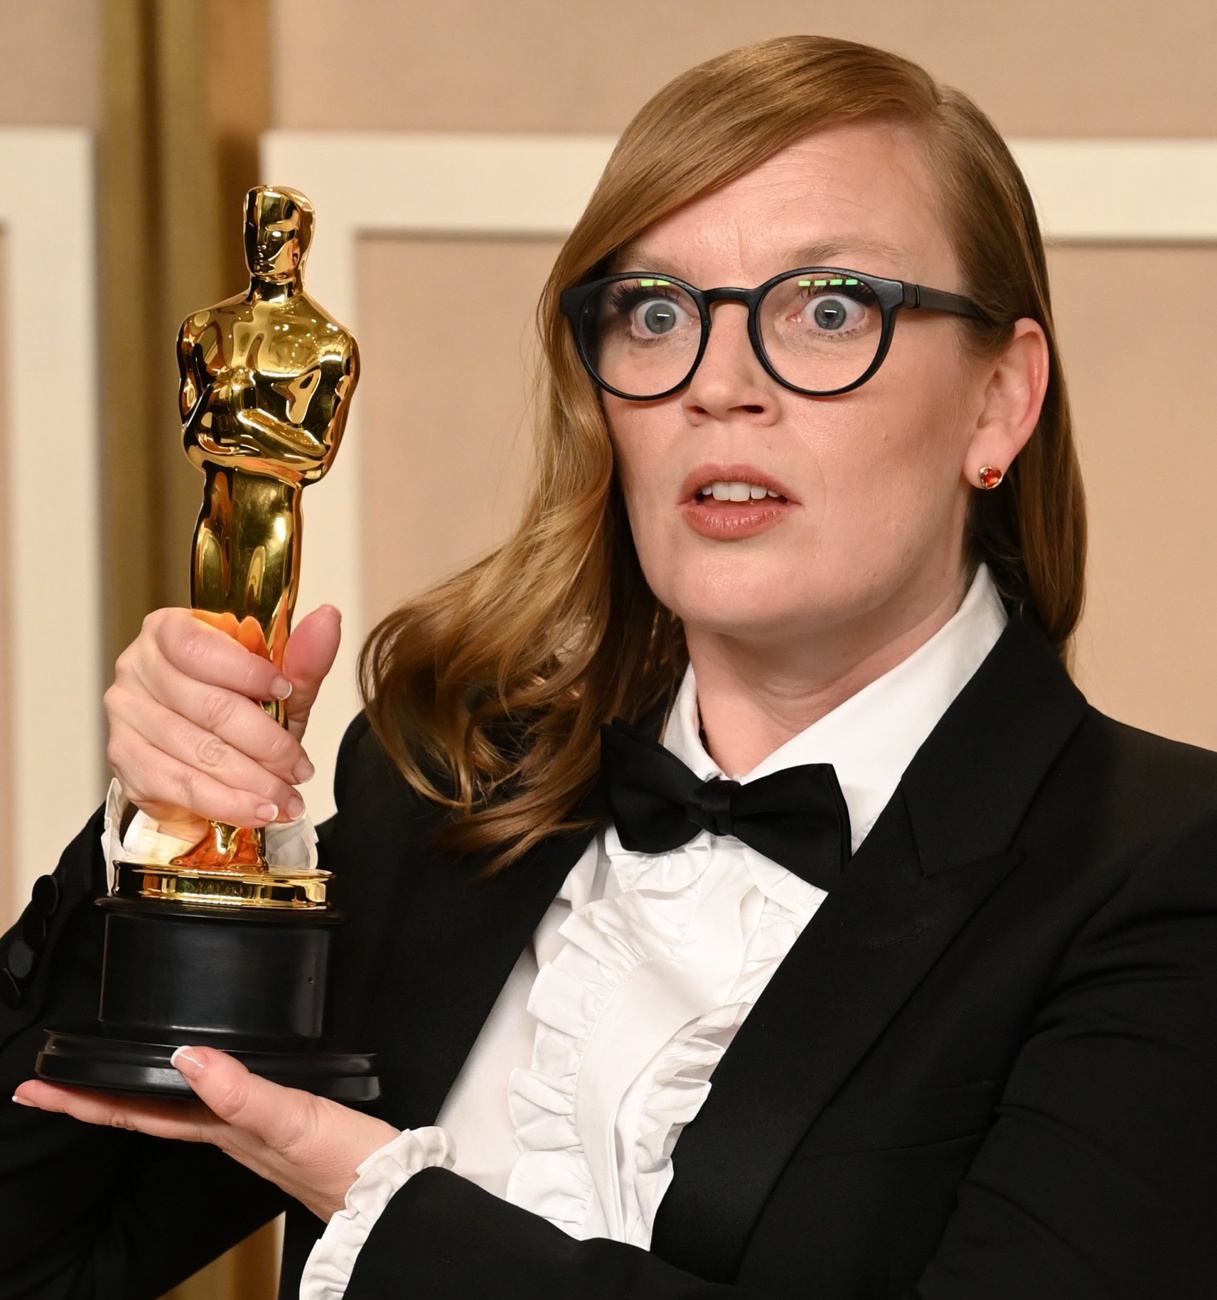 Sarah Polley wins Oscar for her flawless work